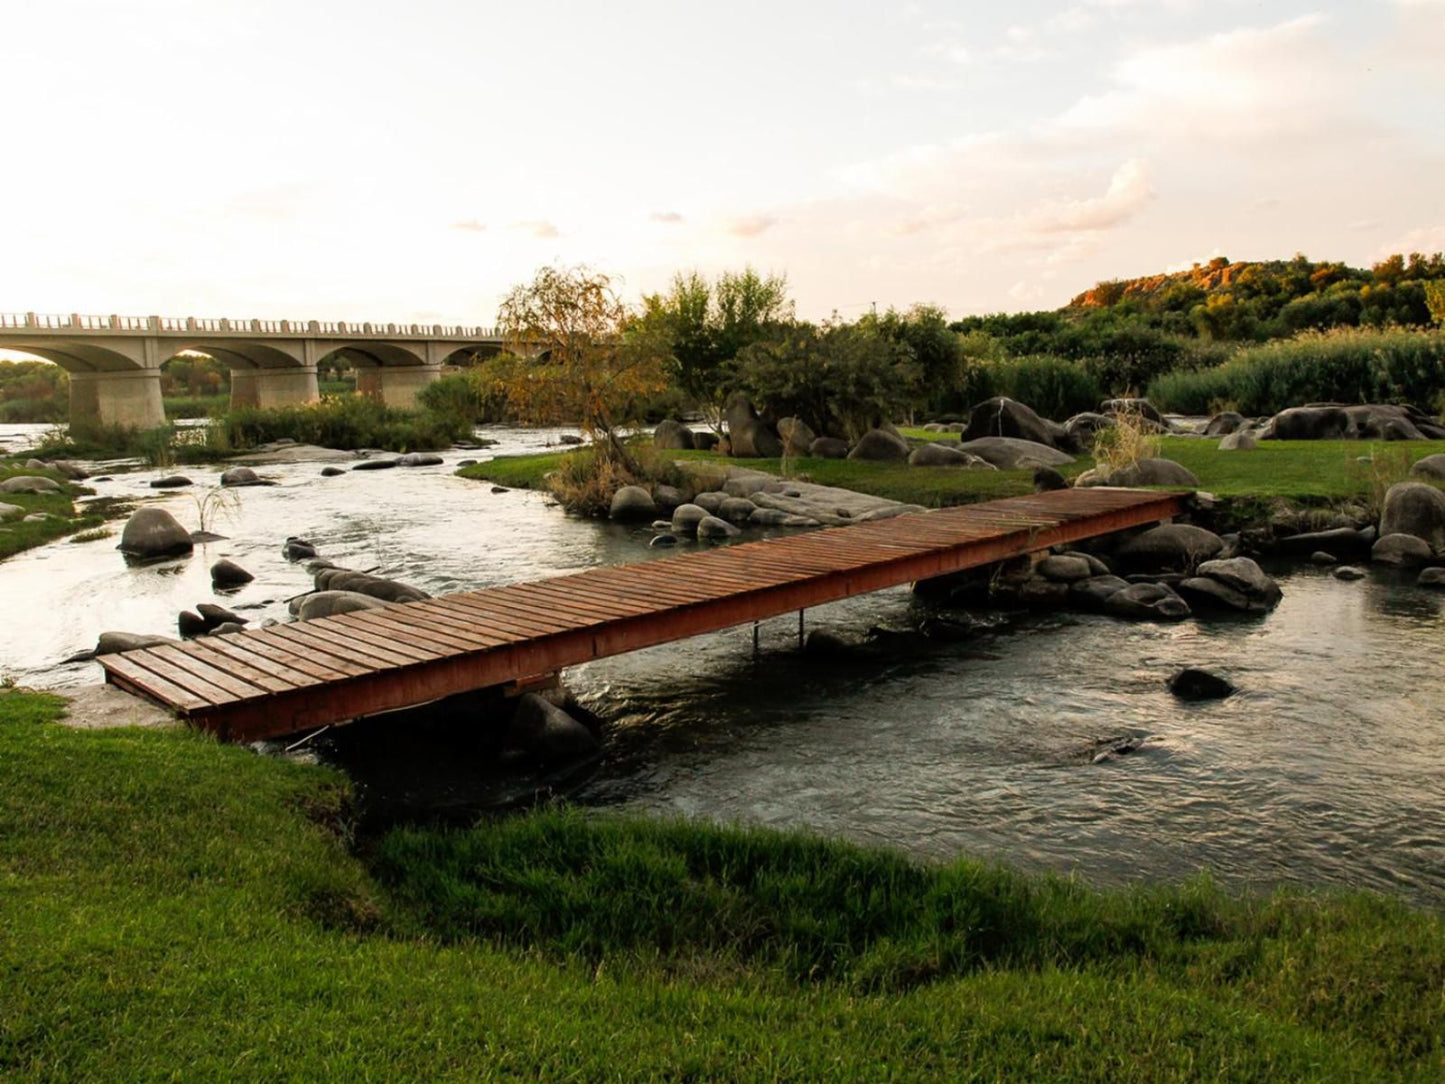 Ikaia River Lodge Keimoes Northern Cape South Africa Bridge, Architecture, River, Nature, Waters